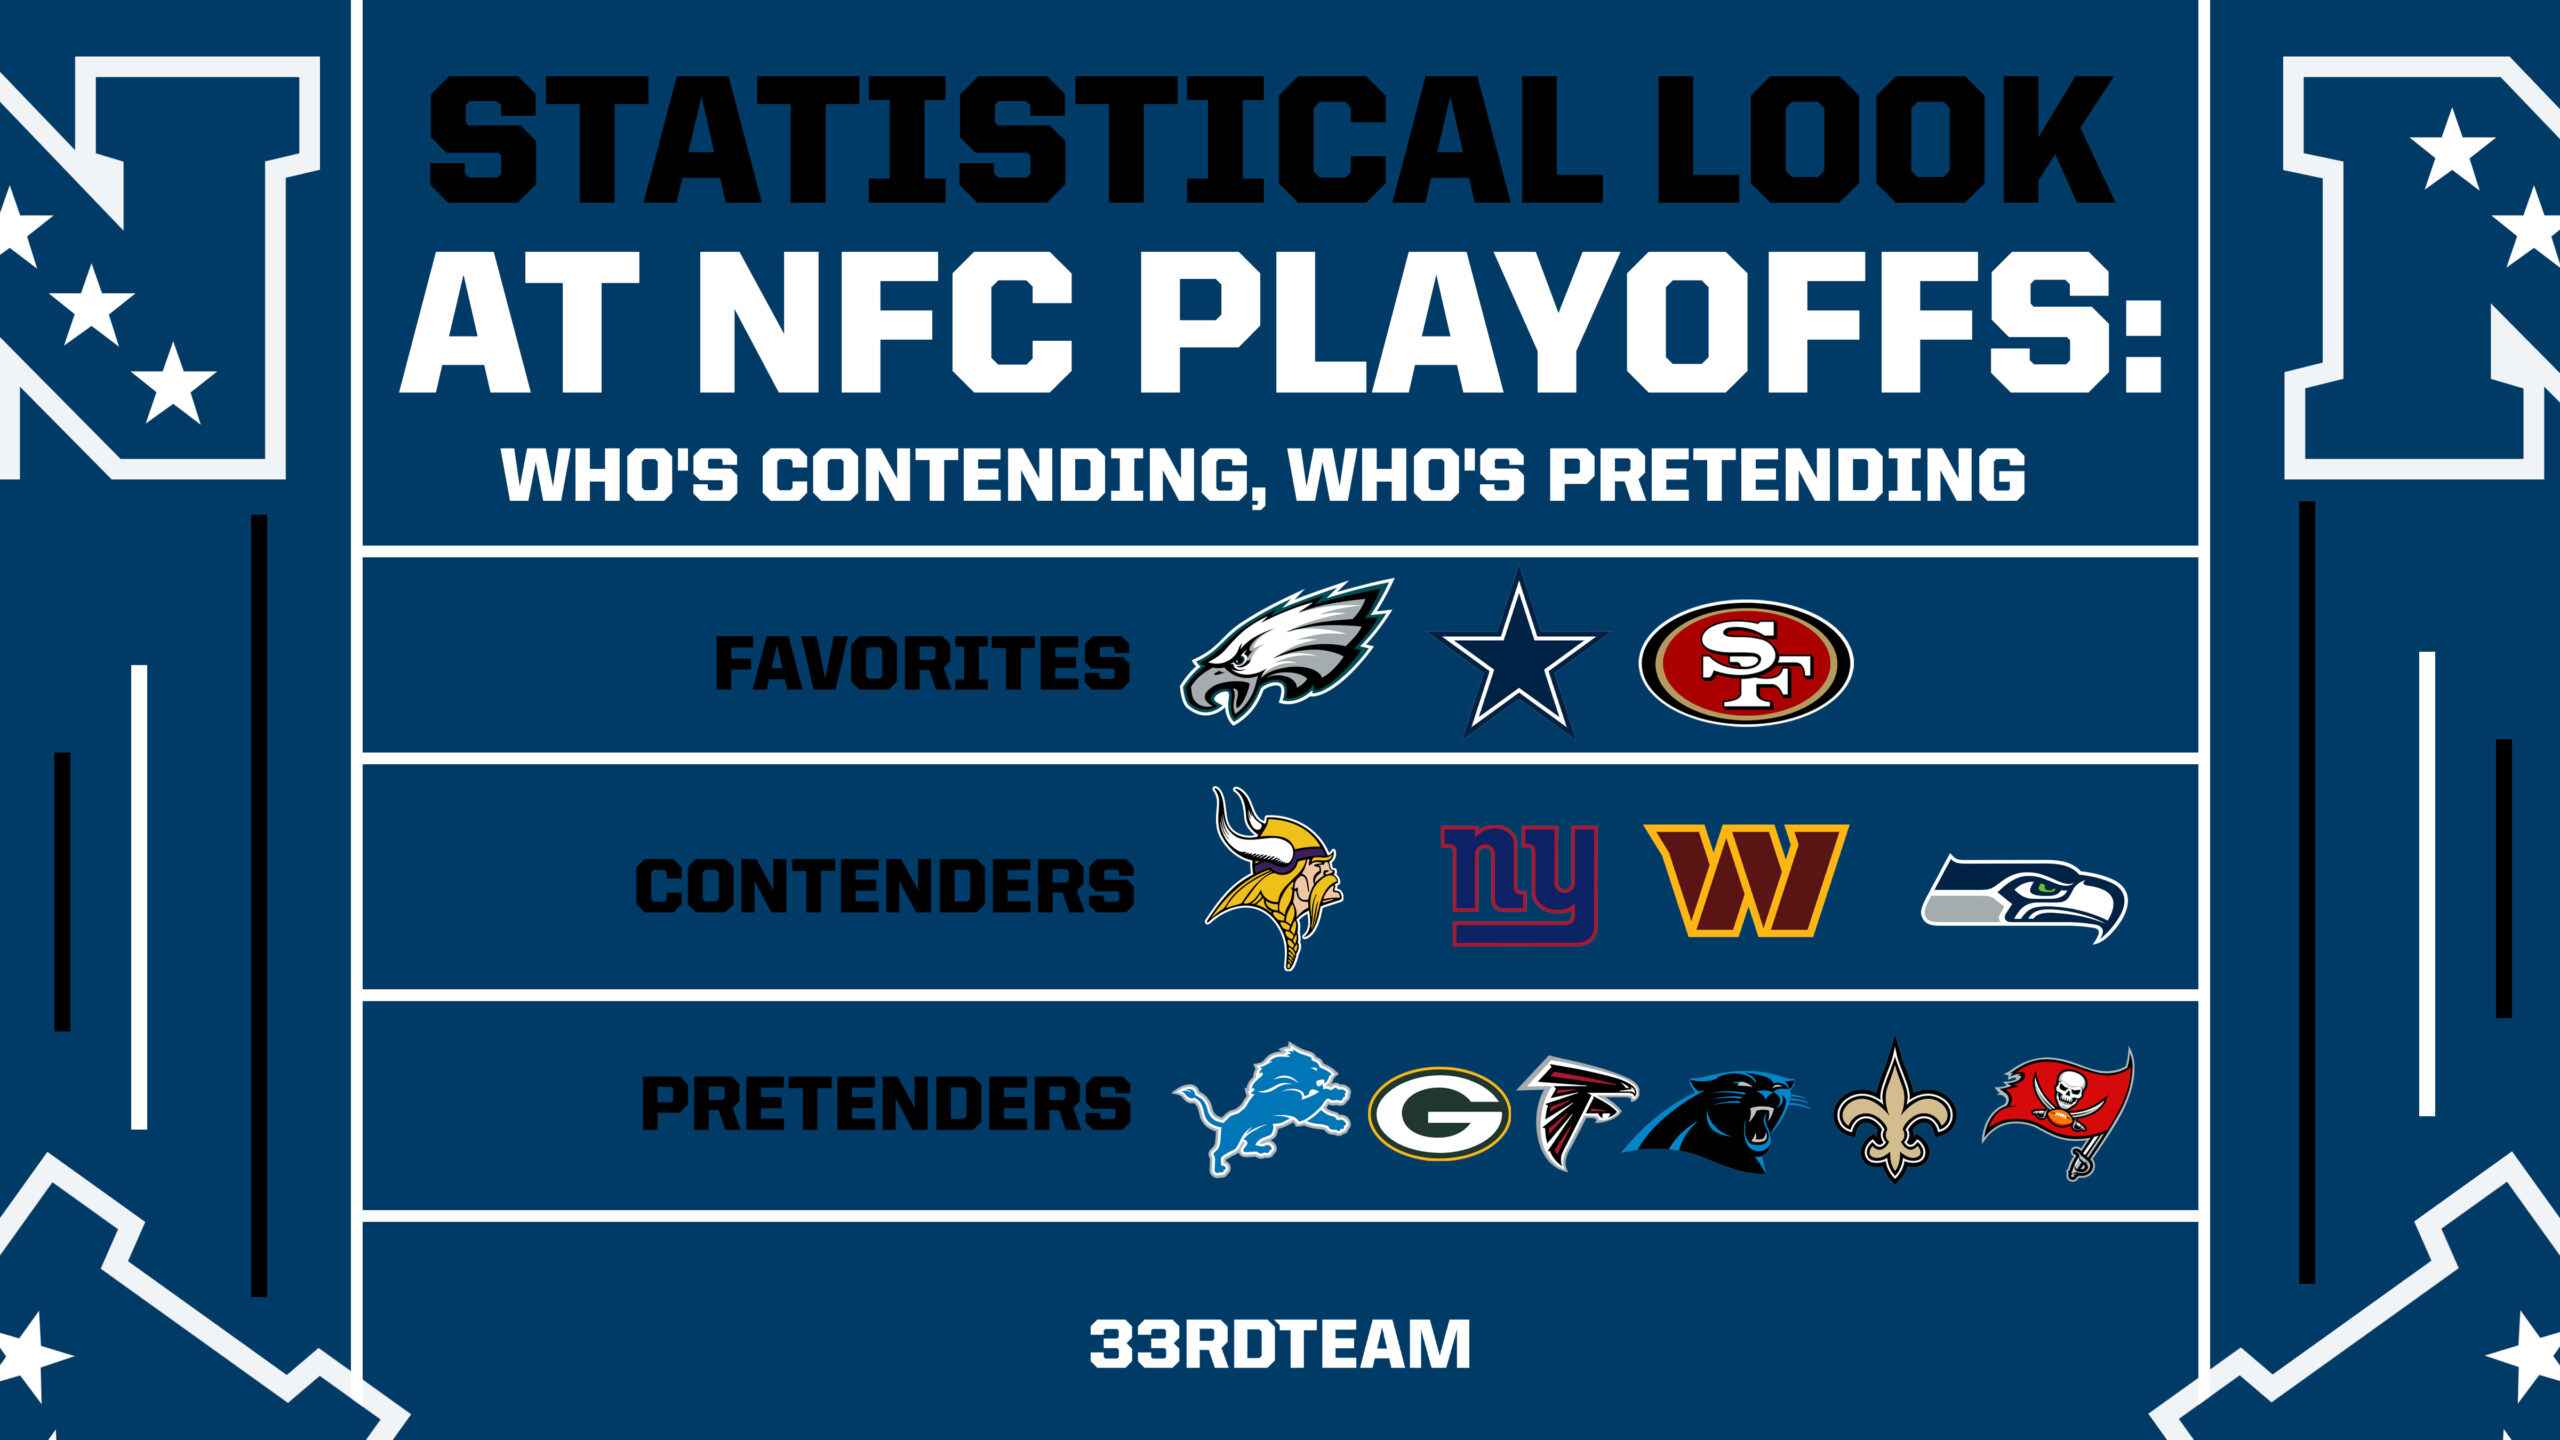 What Teams Are In The NFC